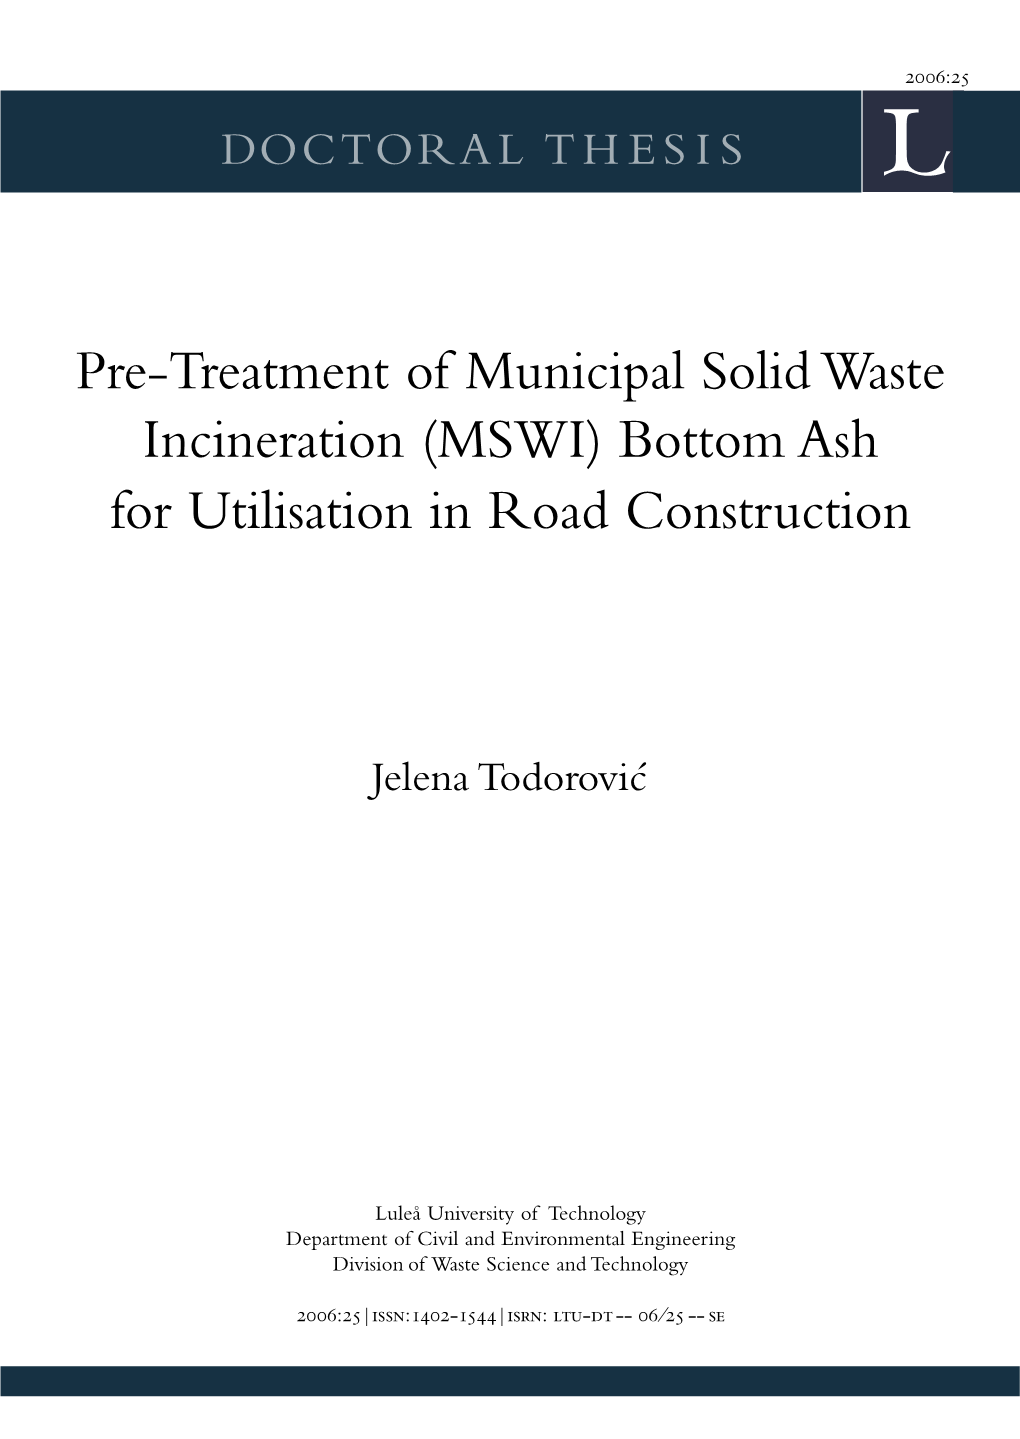 Pre-Treatment of Municipal Solid Waste Incineration (MSWI) Bottom Ash for Utilisation in Road Construction